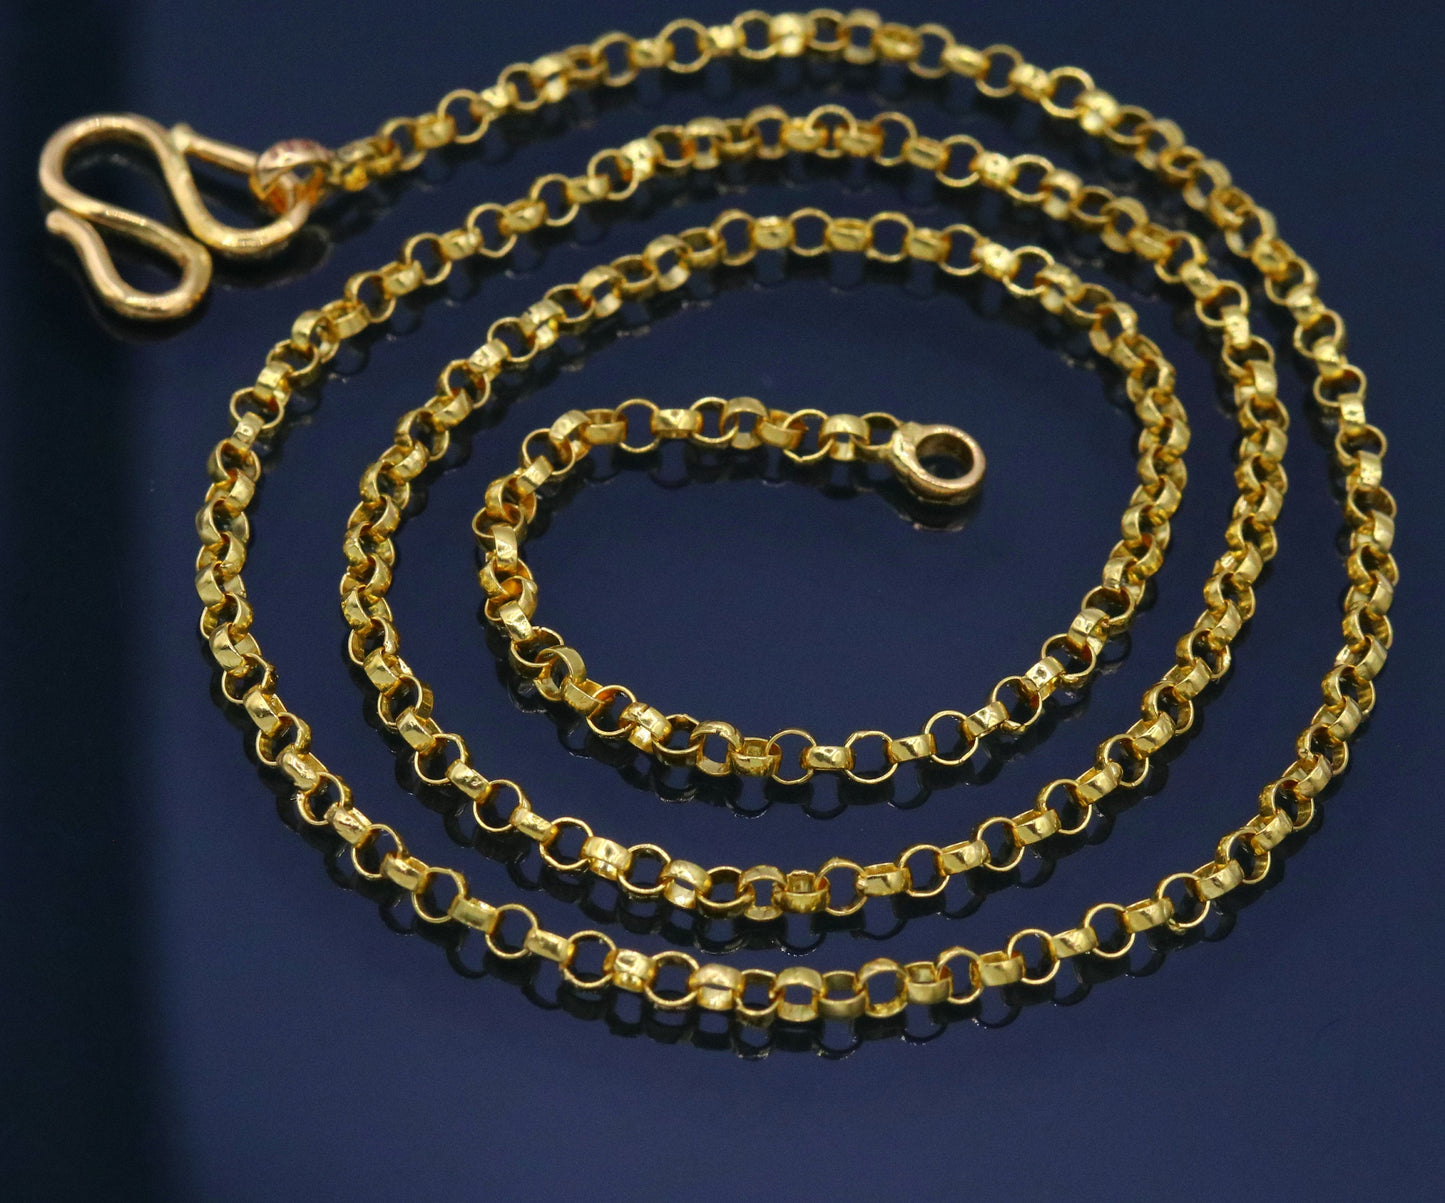 Handmade Genuine 22karat yellow gold gorgeous cable rolo chain stylish chain gifting jewelry from india - TRIBAL ORNAMENTS